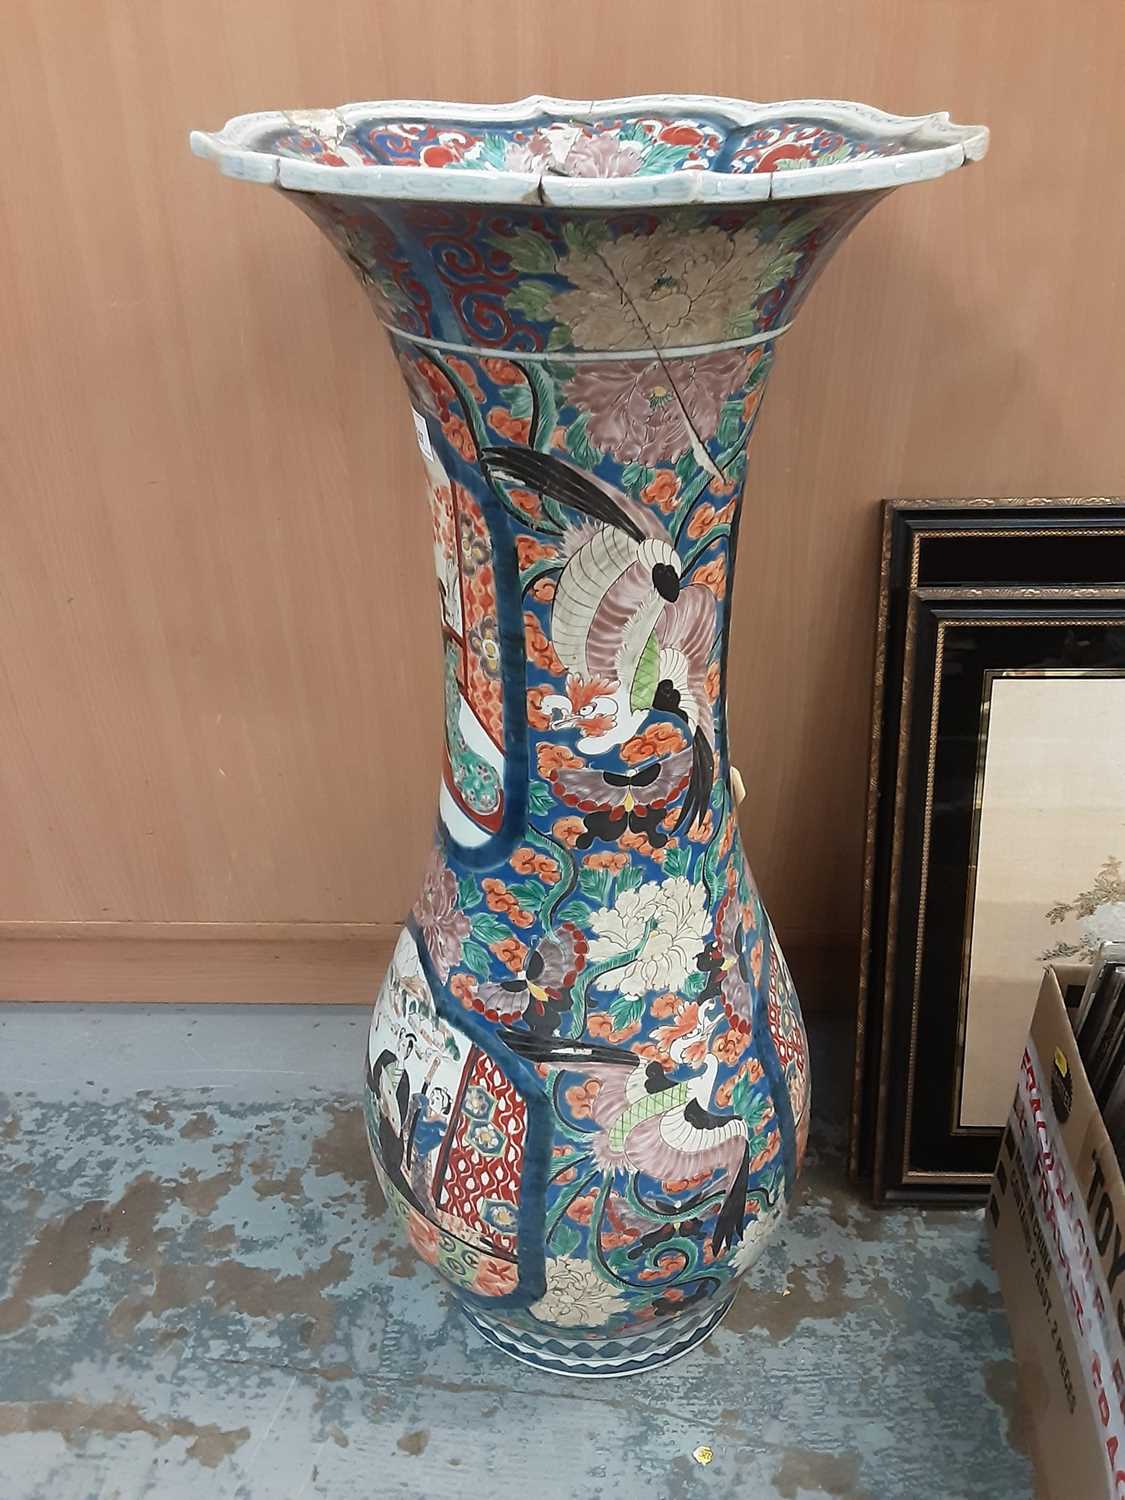 Lot 379 - Very large 19th century Japanese porcelain vase, with old Kim Harris Oriental Antiques label and £620 price label